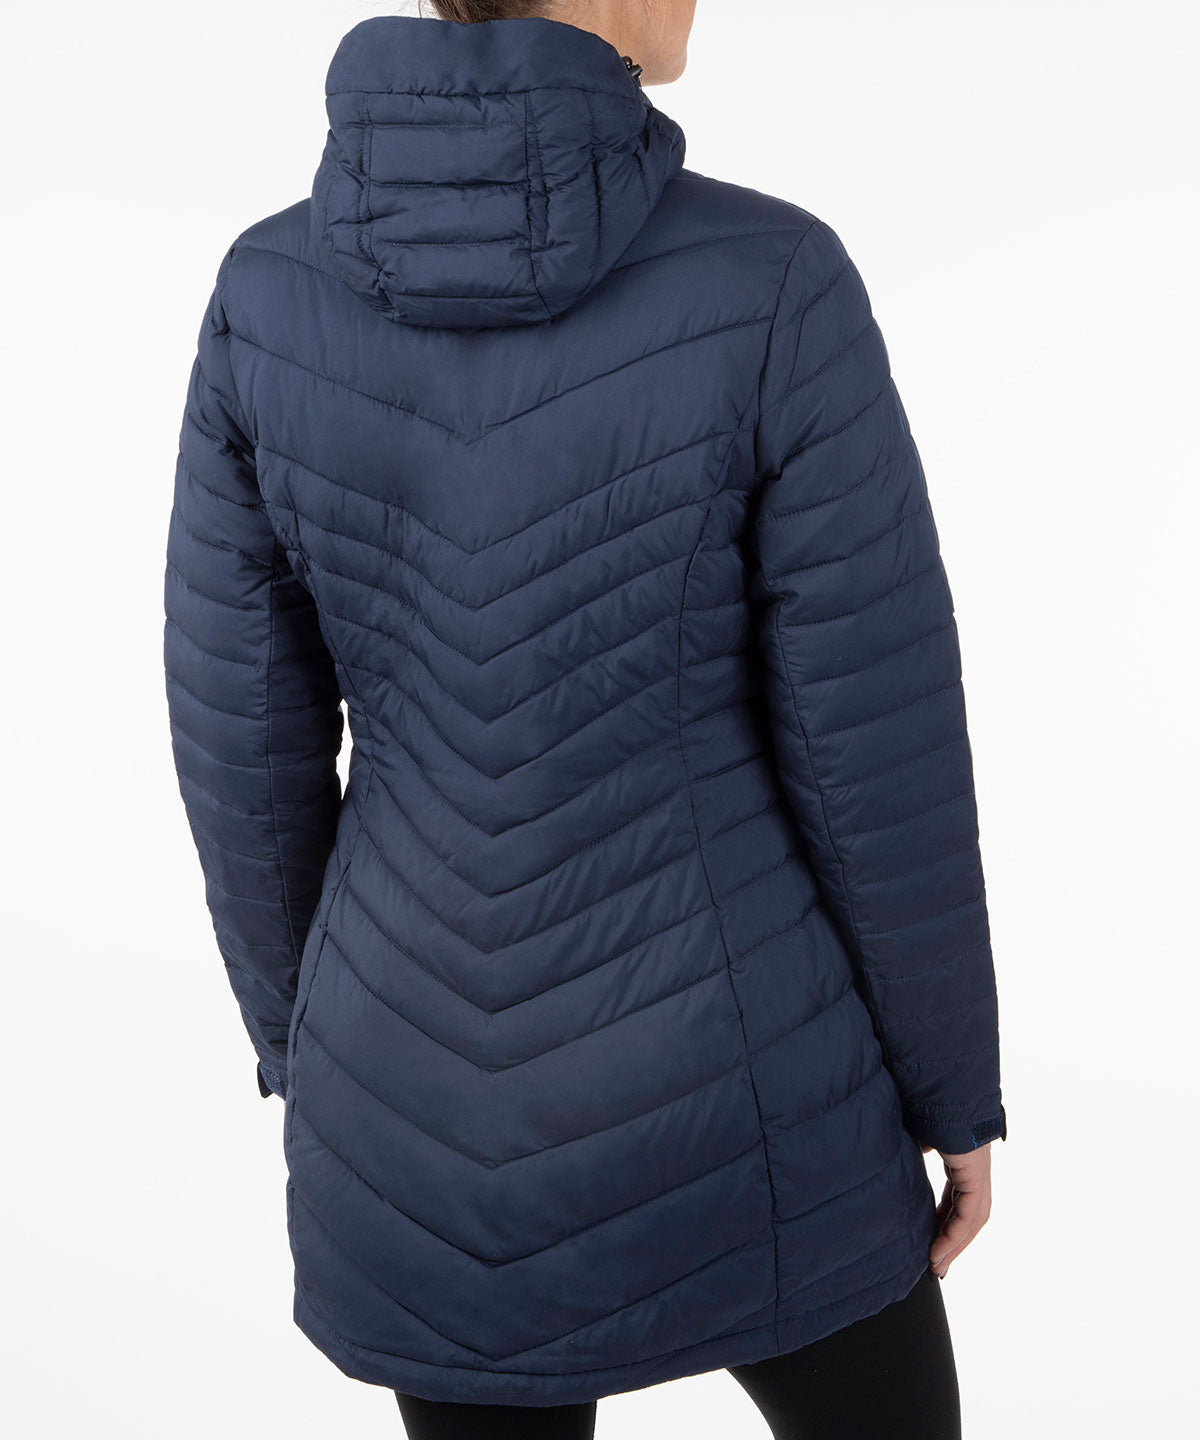 Women's Jojo Thermal Quilted Long Jacket with Hood - Sunice